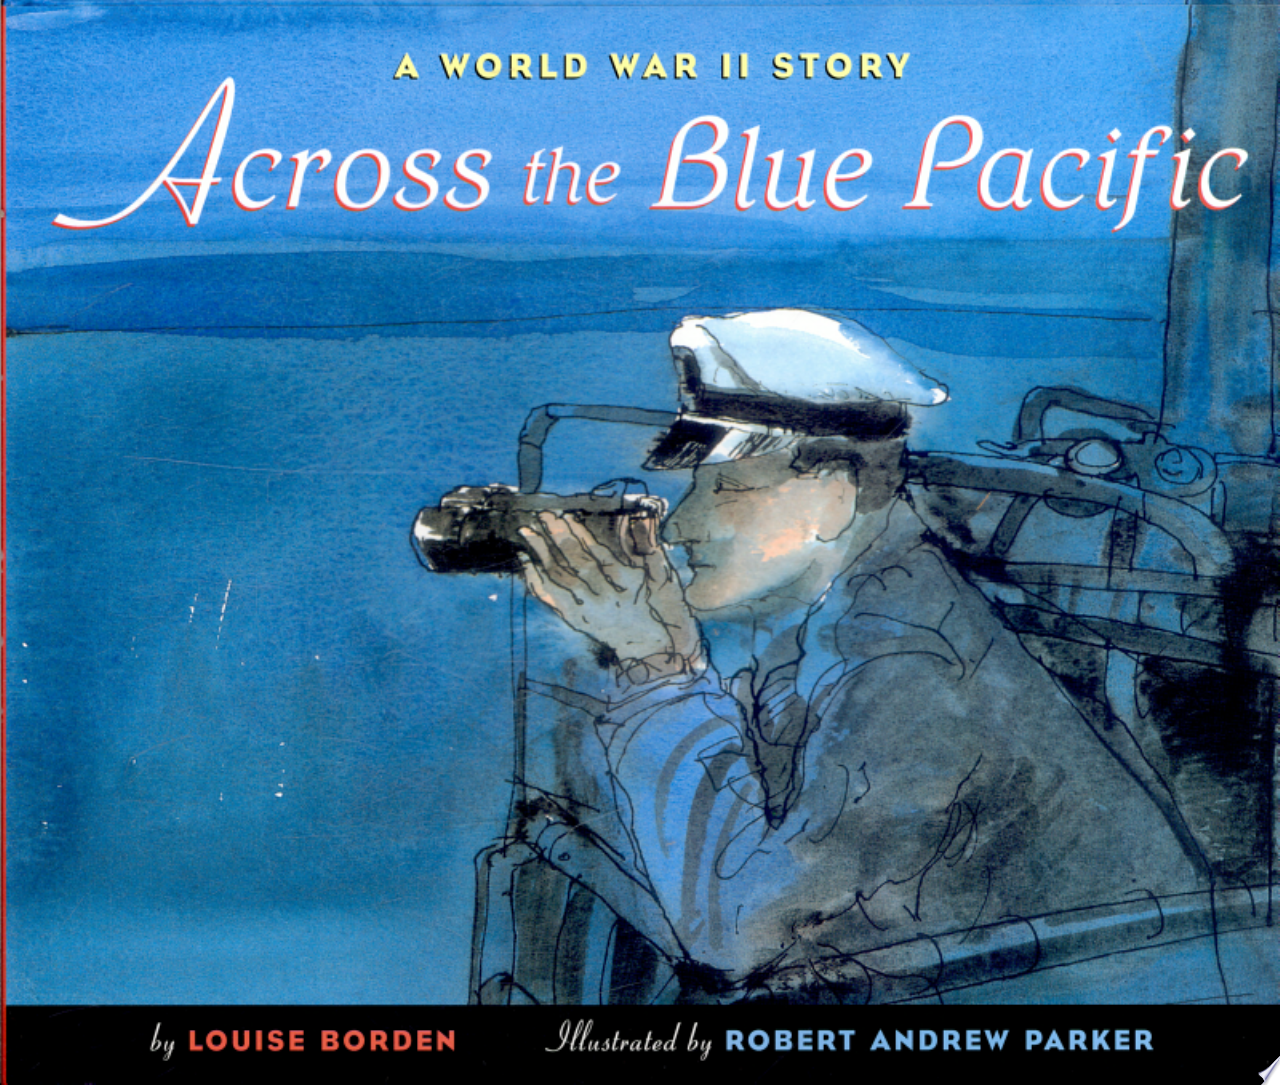 Image for "Across the Blue Pacific"